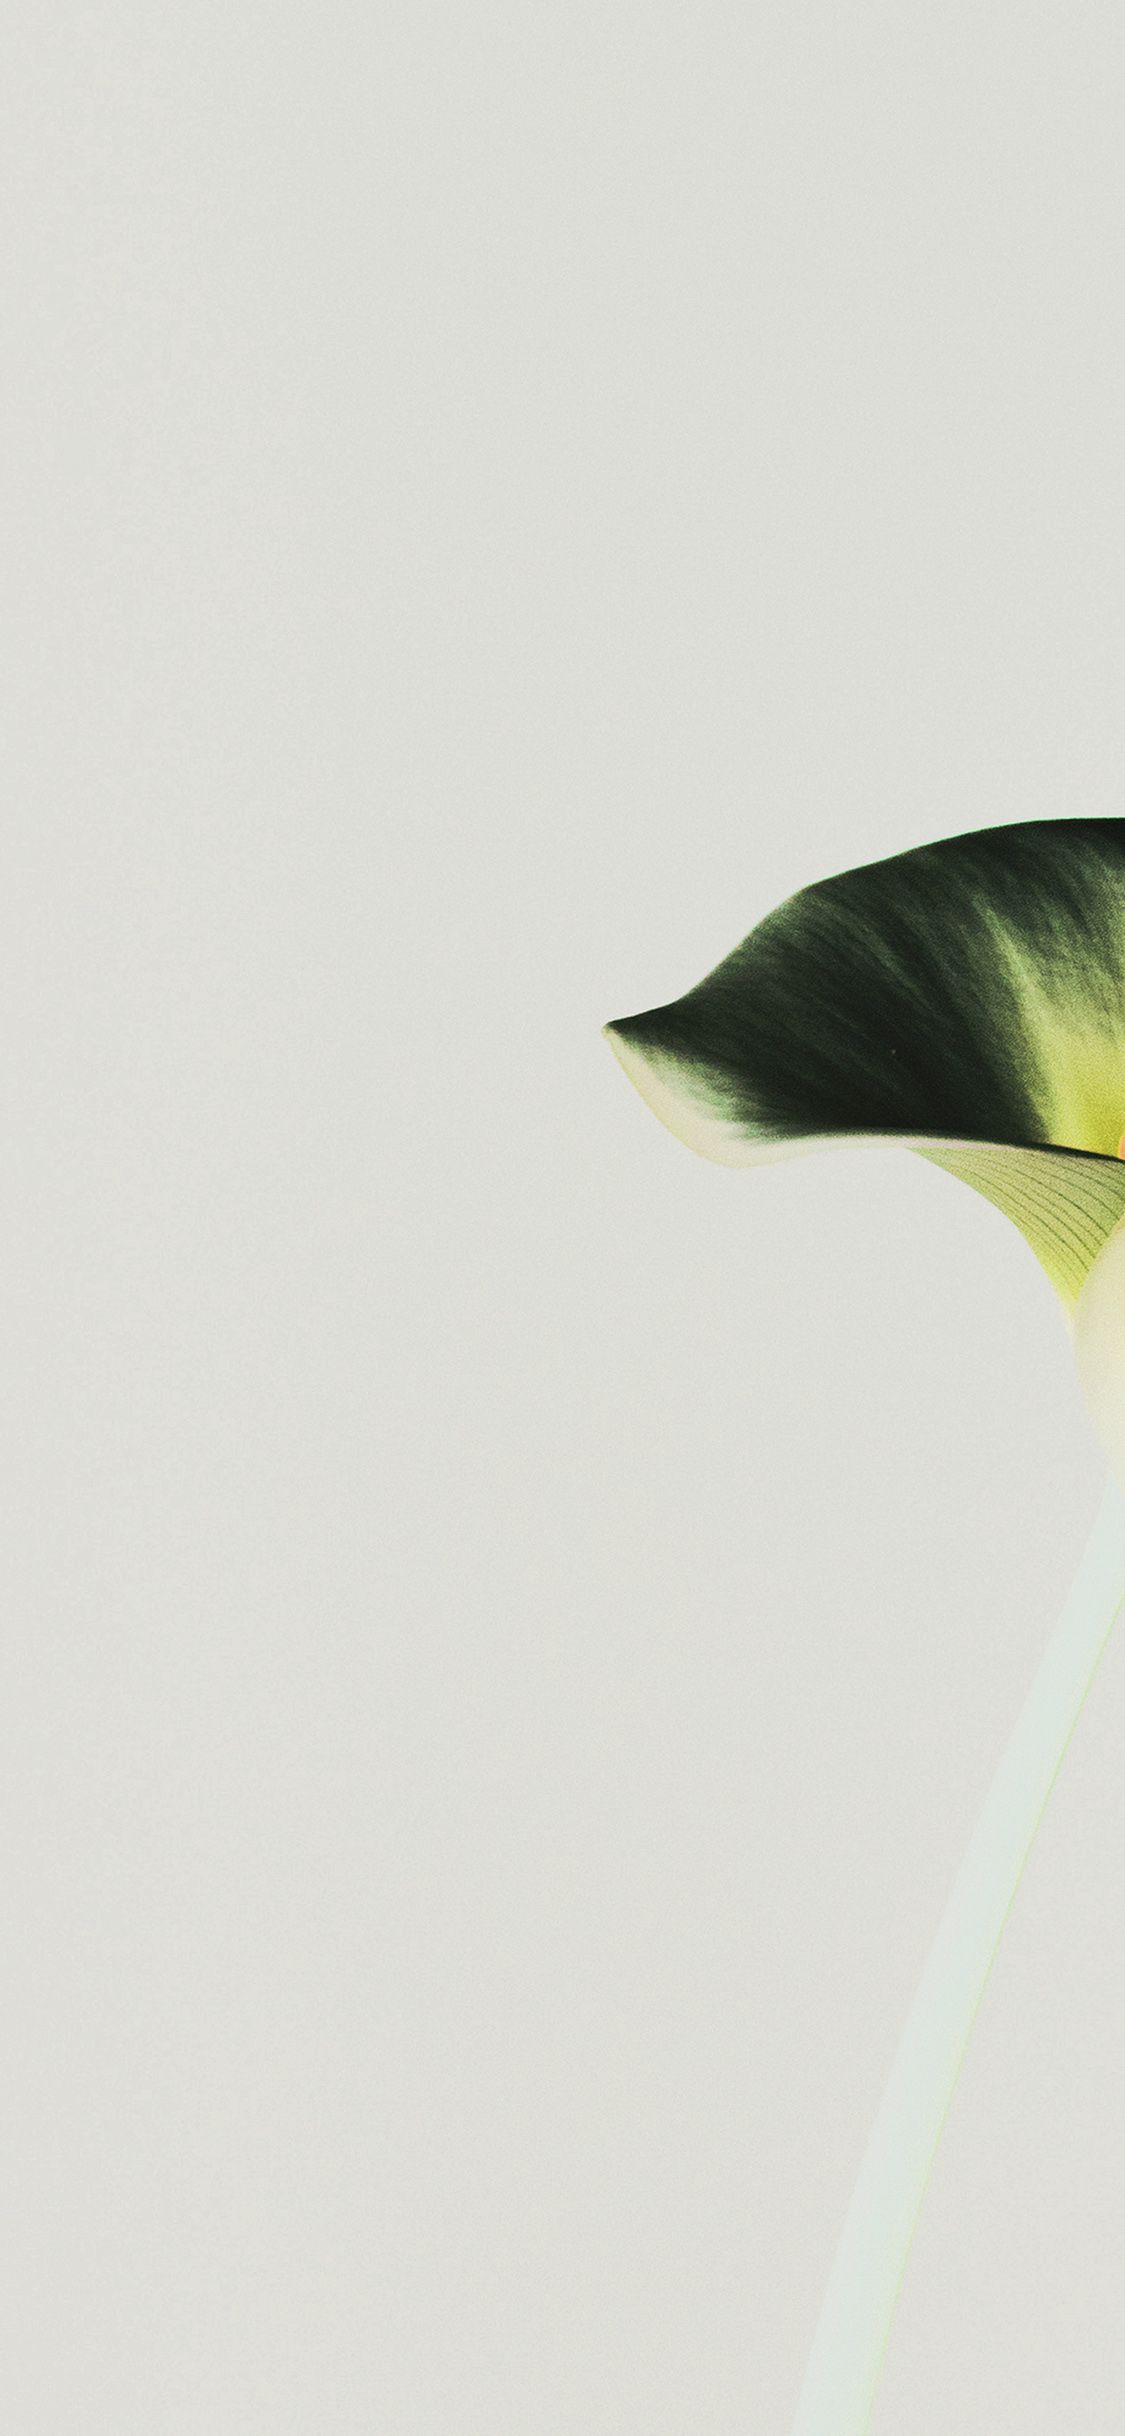 iPhone X wallpaper. lily flower minimal simple green nature inverted